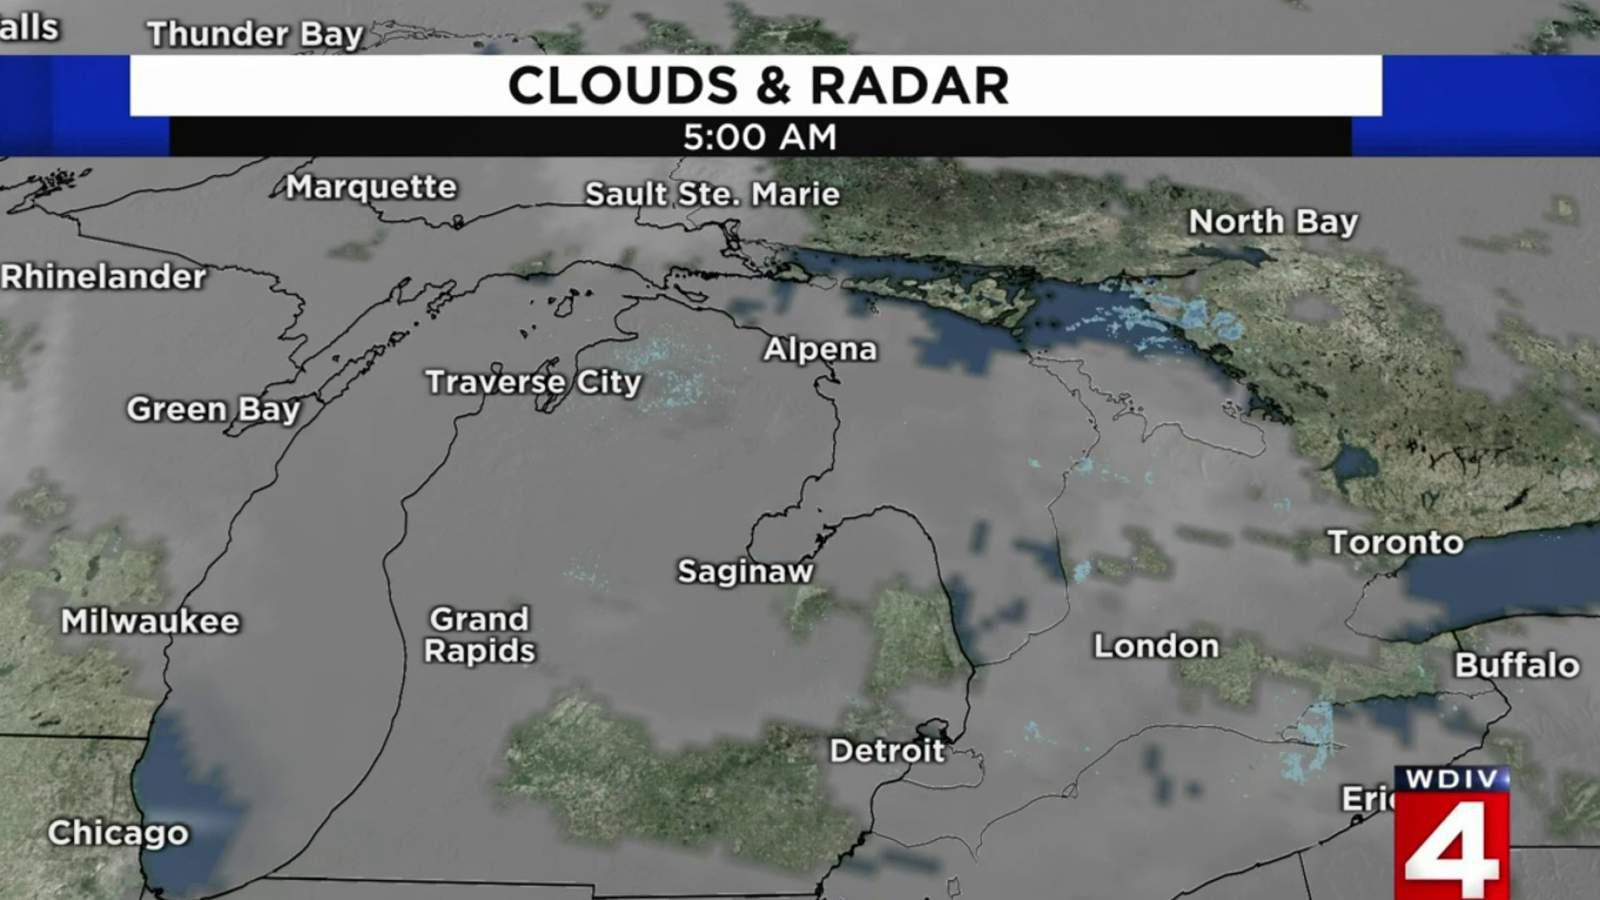 Metro Detroit weather: Pick your favorite shade of gray